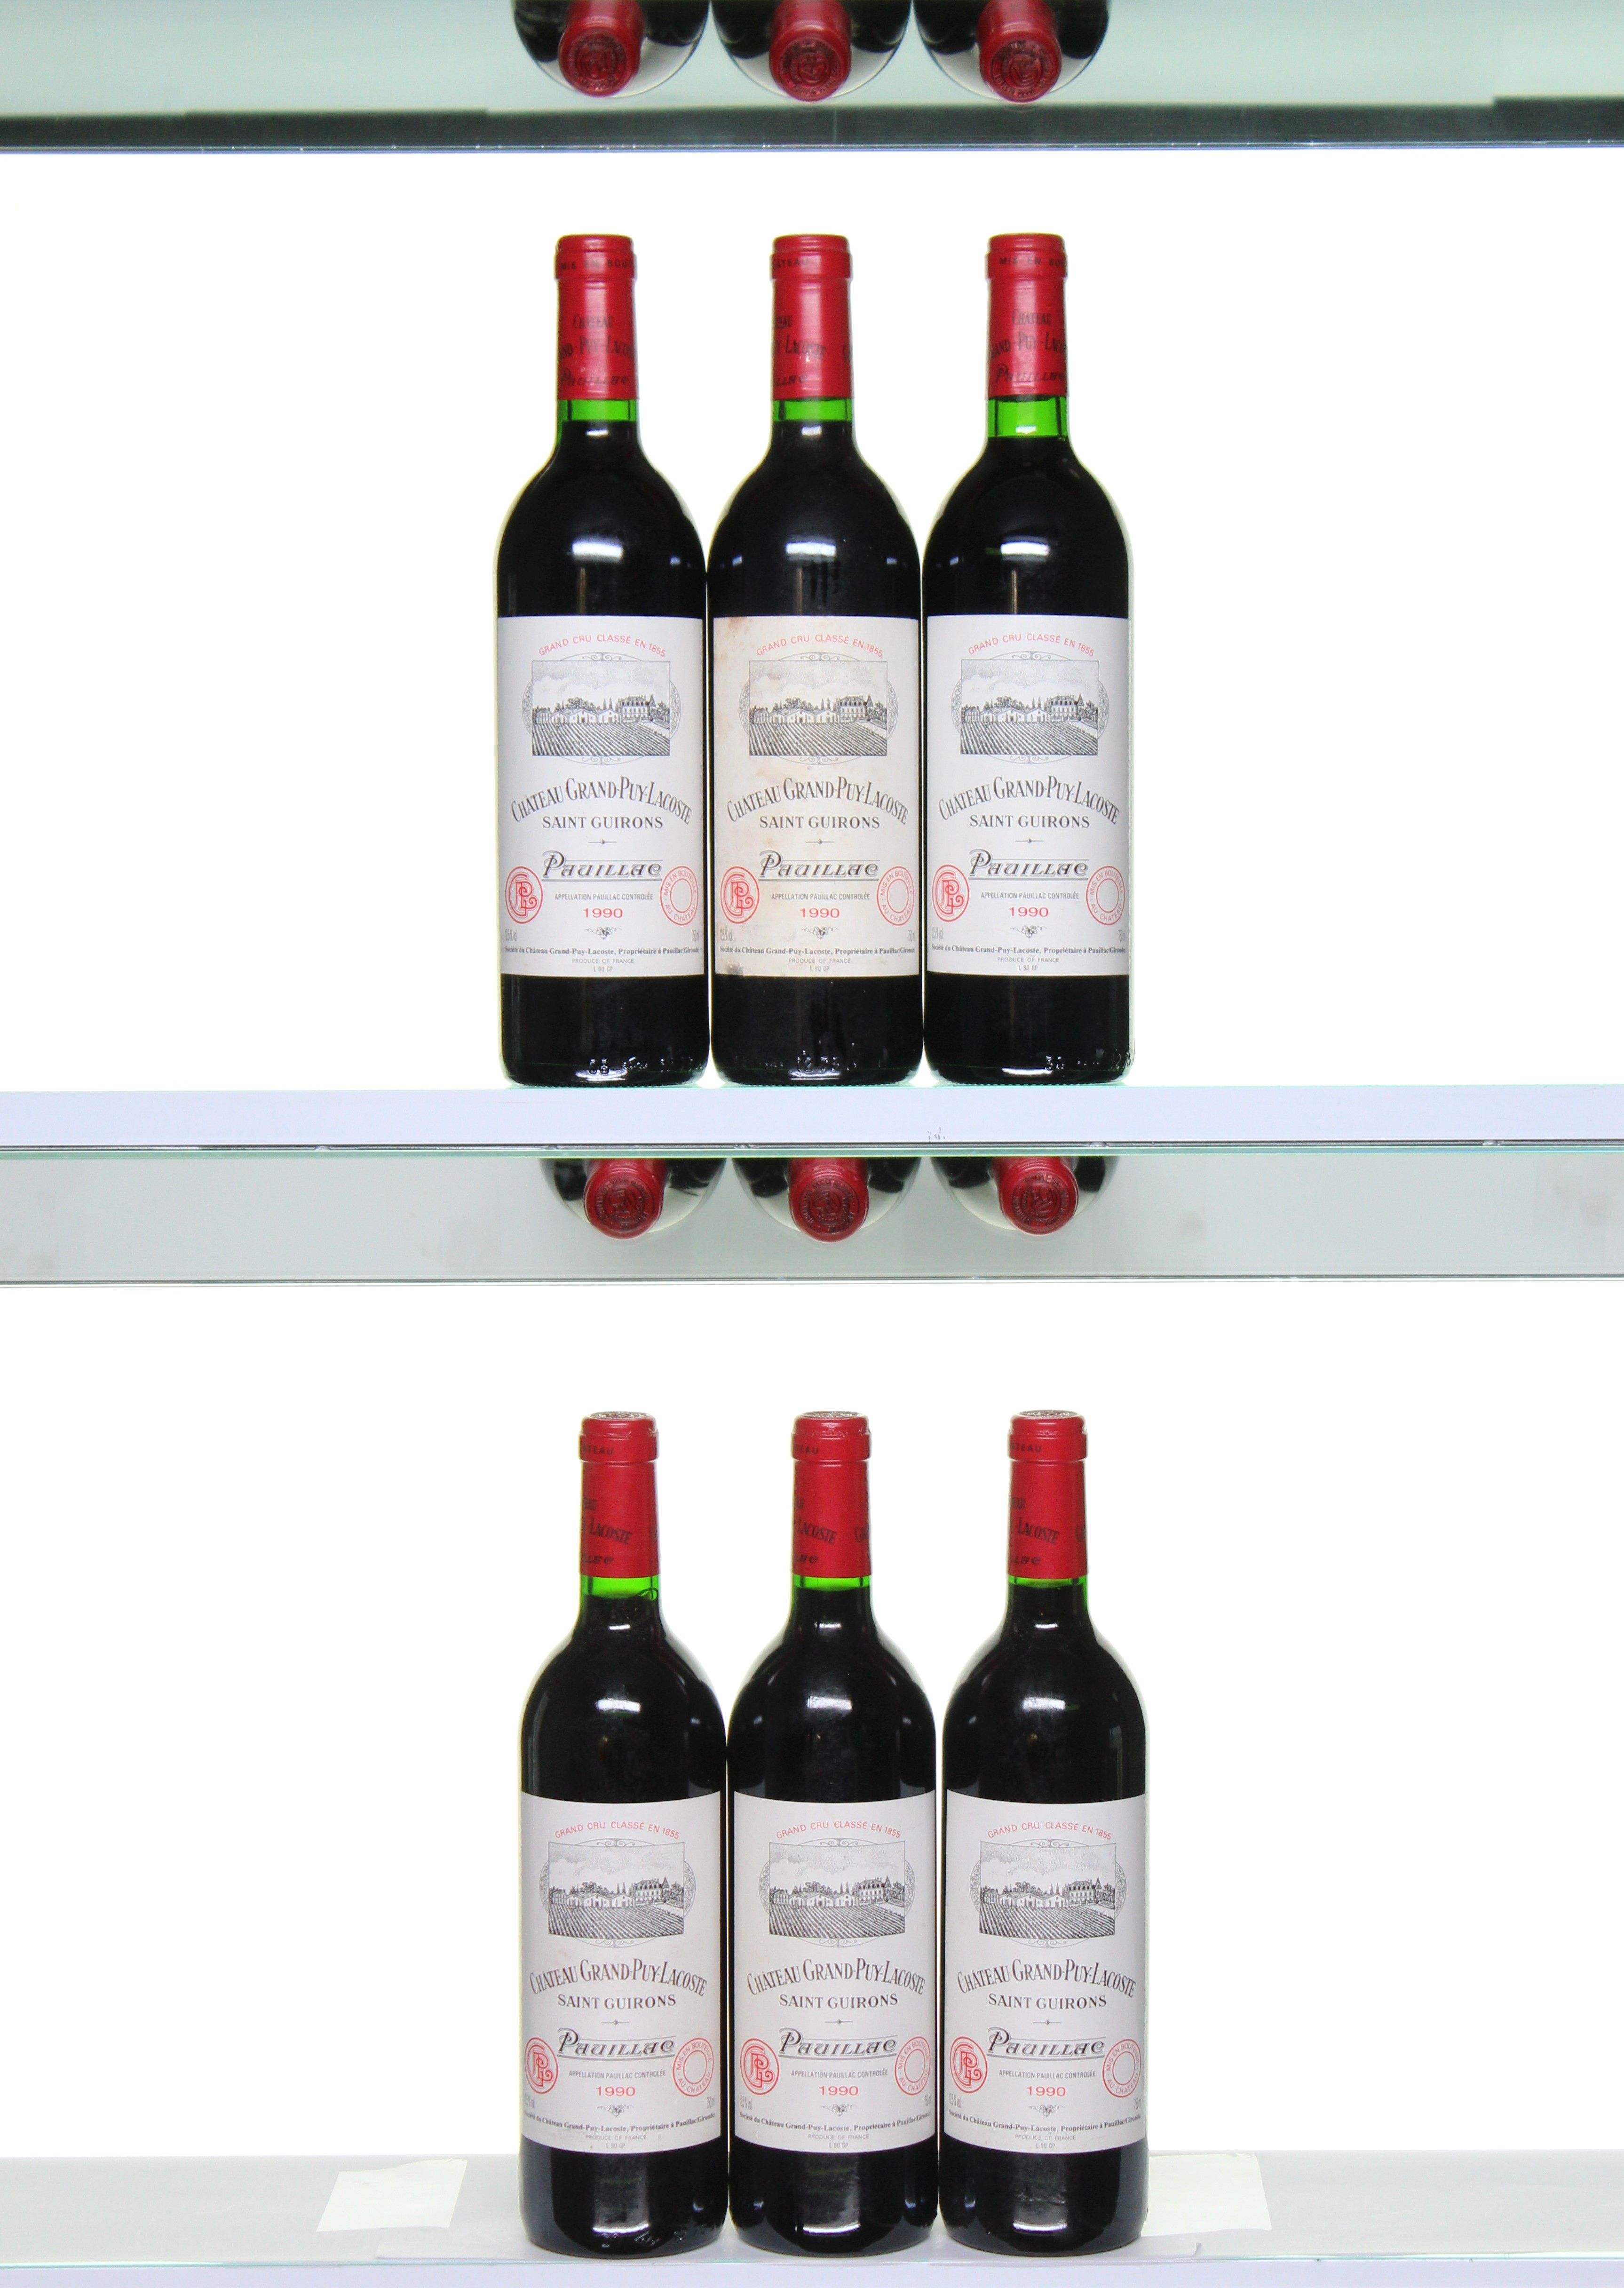 1990 Chateau Grand Puy Lacoste